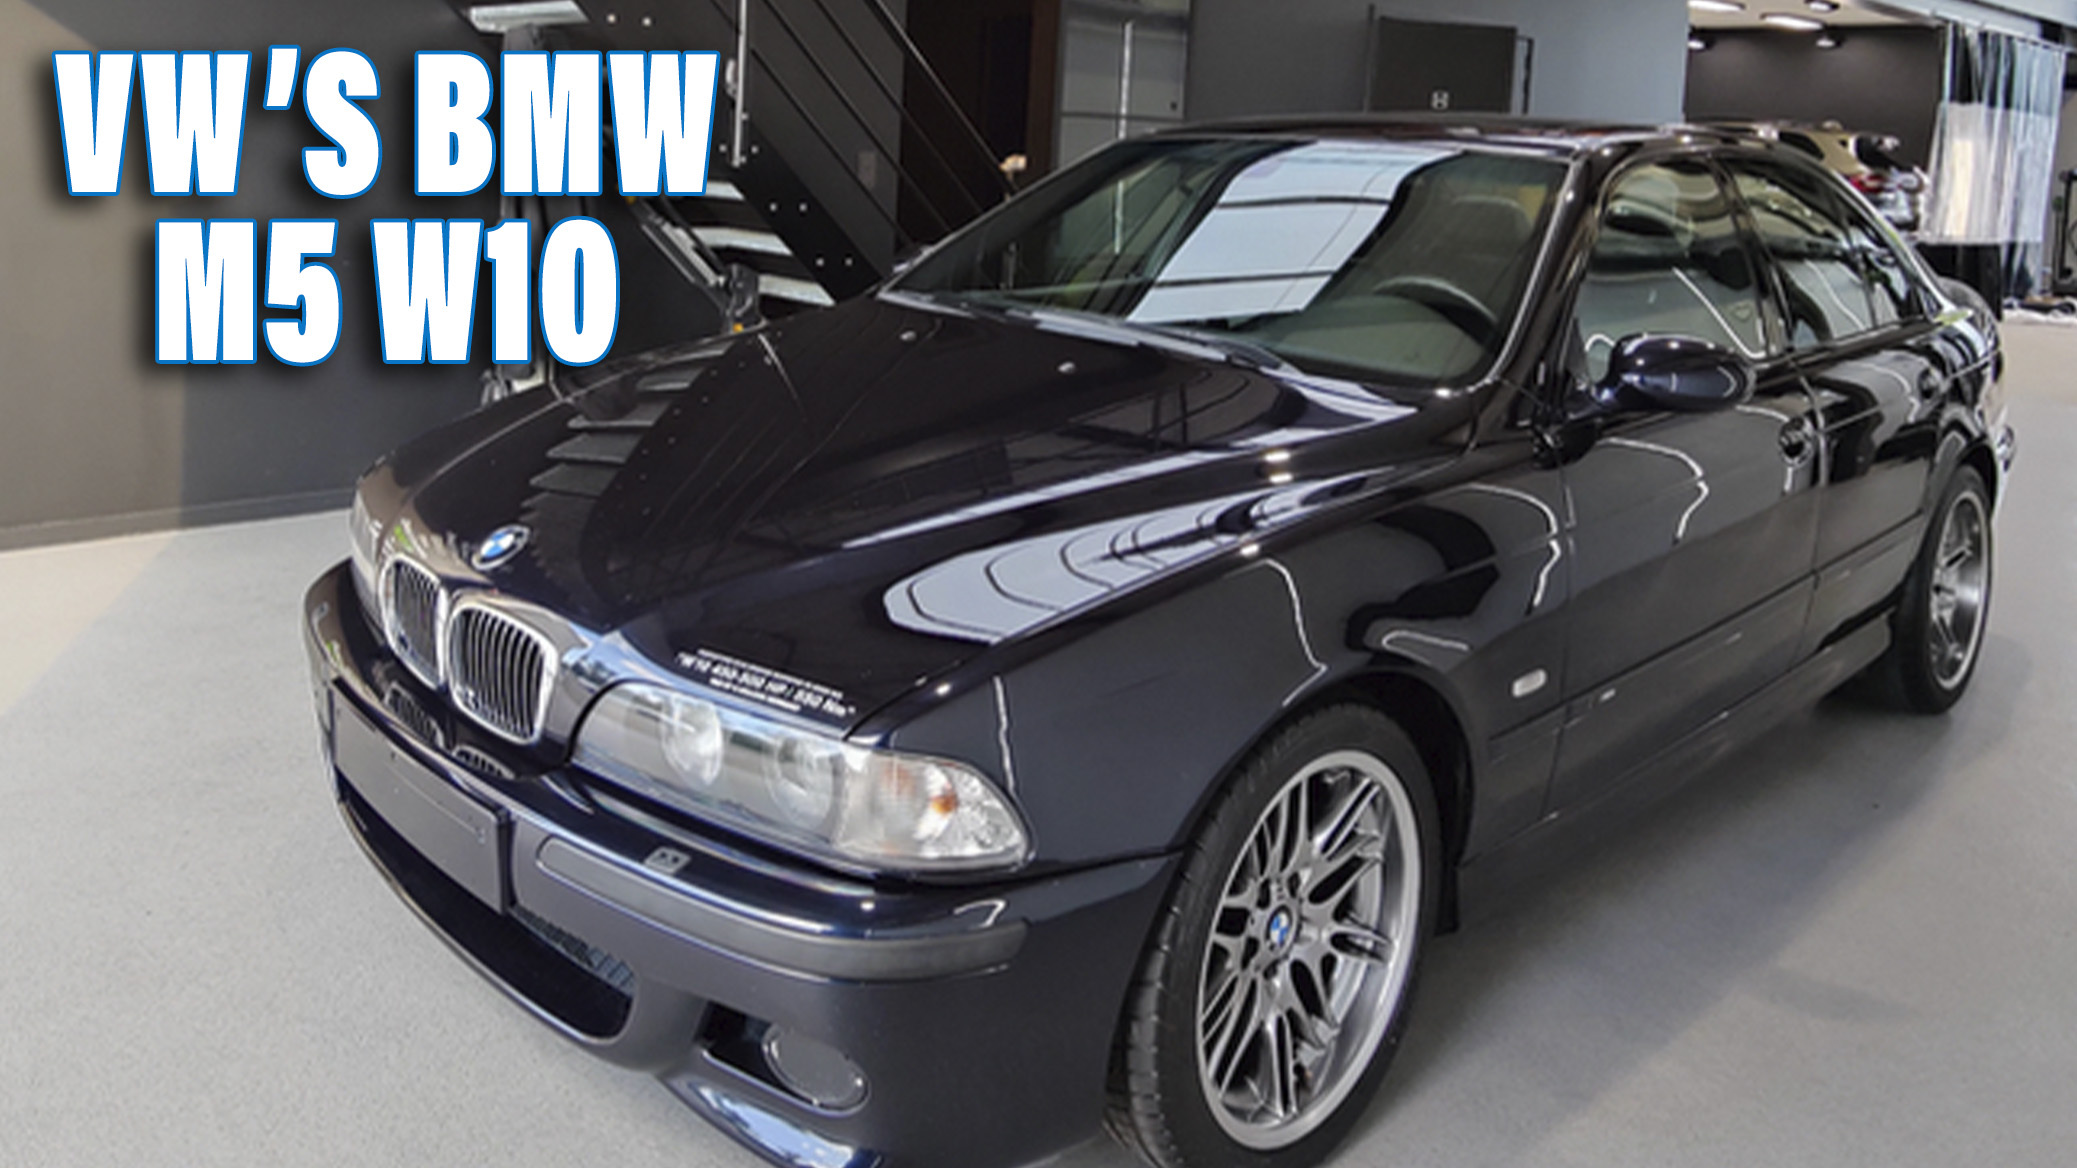 V-10-Powered BMW 5-Series Touring Custom Swap For Sale in America